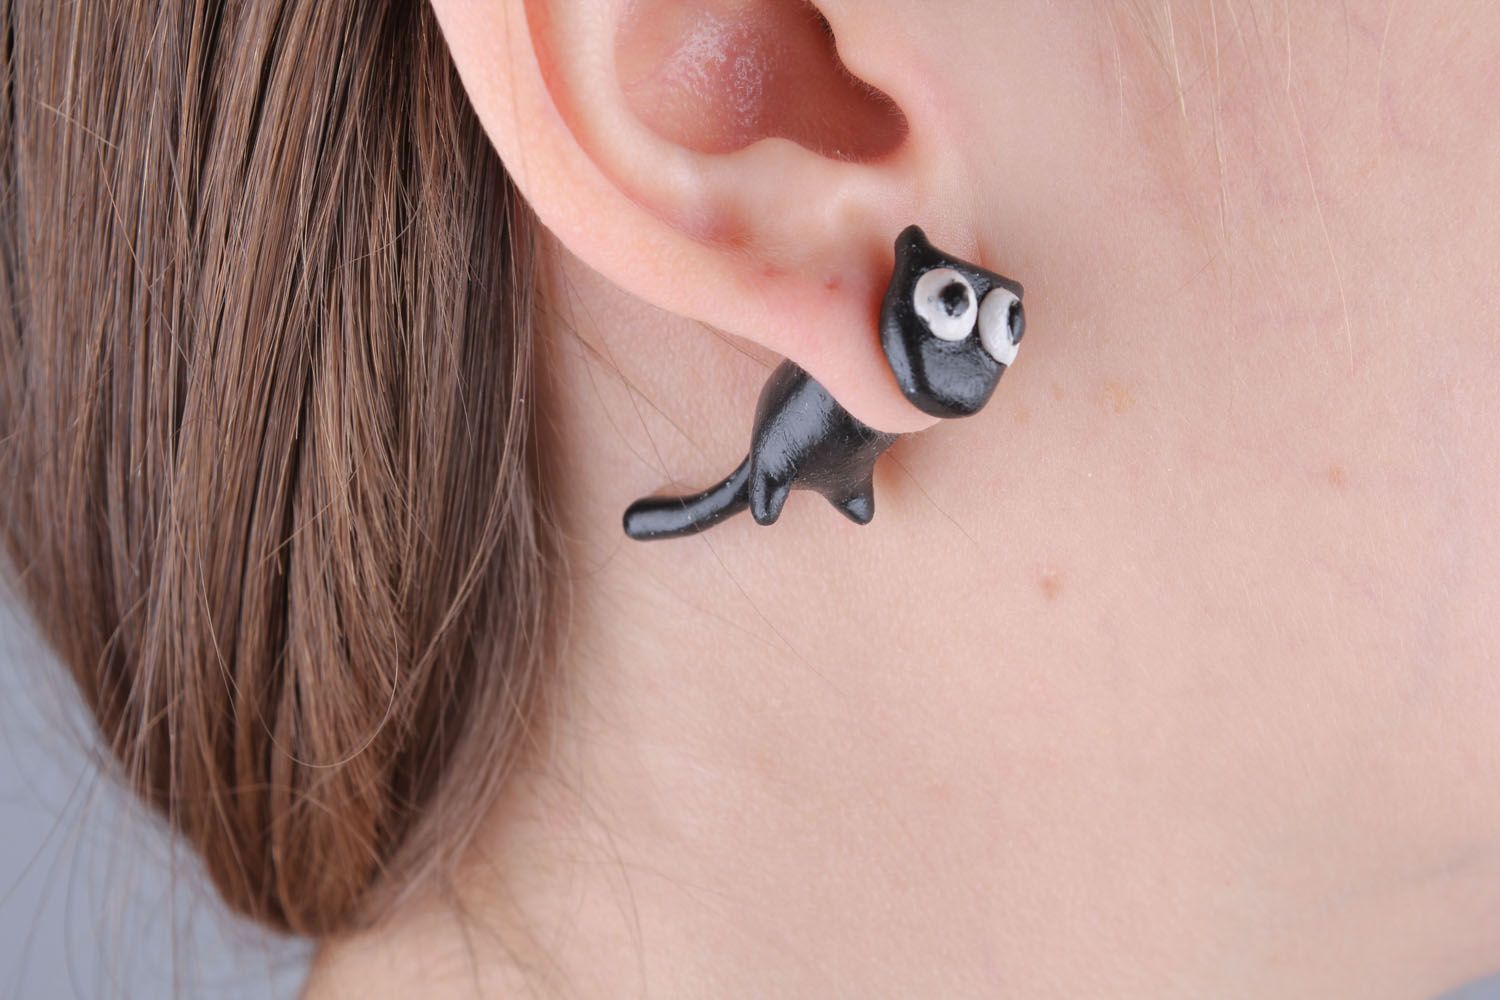 Fake ear plugs in the shape of kittens photo 1